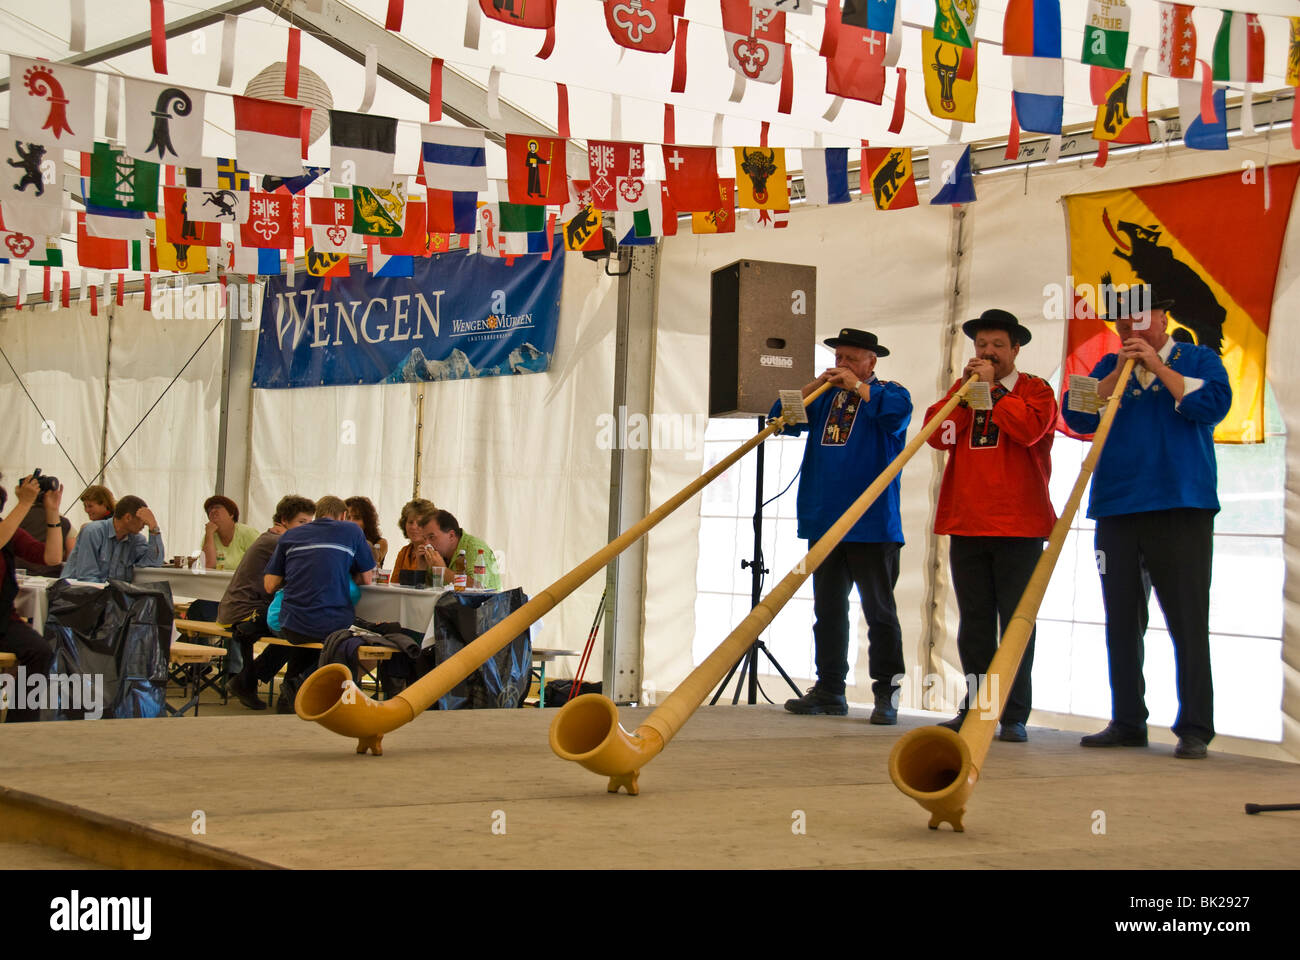 Men playing alphorn or alpenhorn or alpine horn at the Wengen Cheese Festival in Switzerland, the alphorn is a is a labrophone Stock Photo